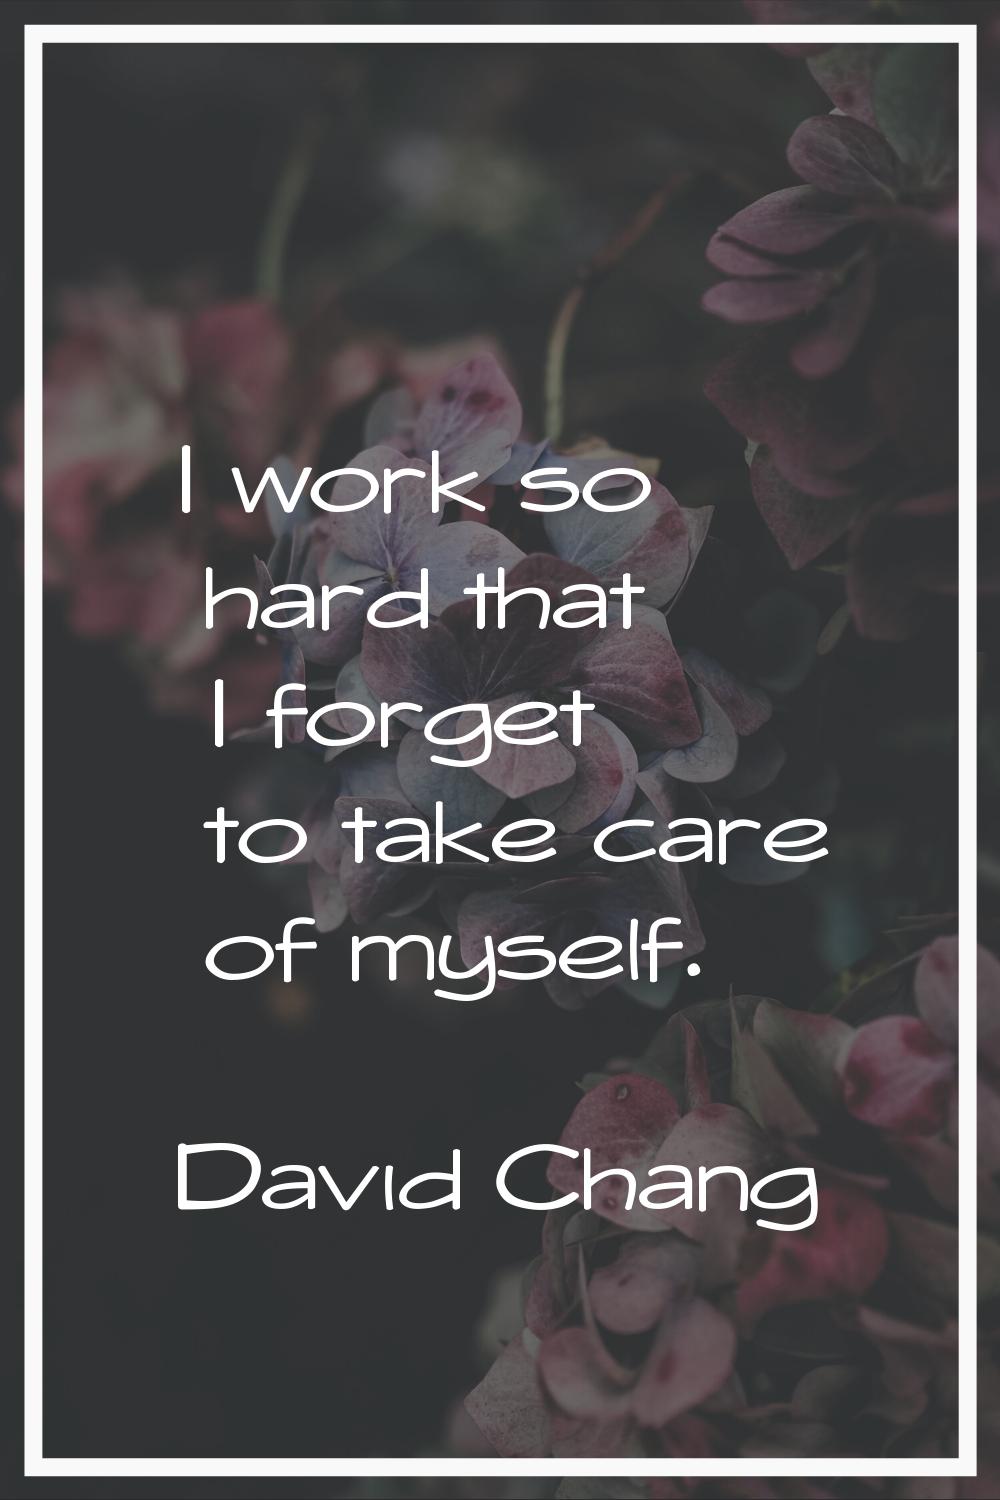 I work so hard that I forget to take care of myself.